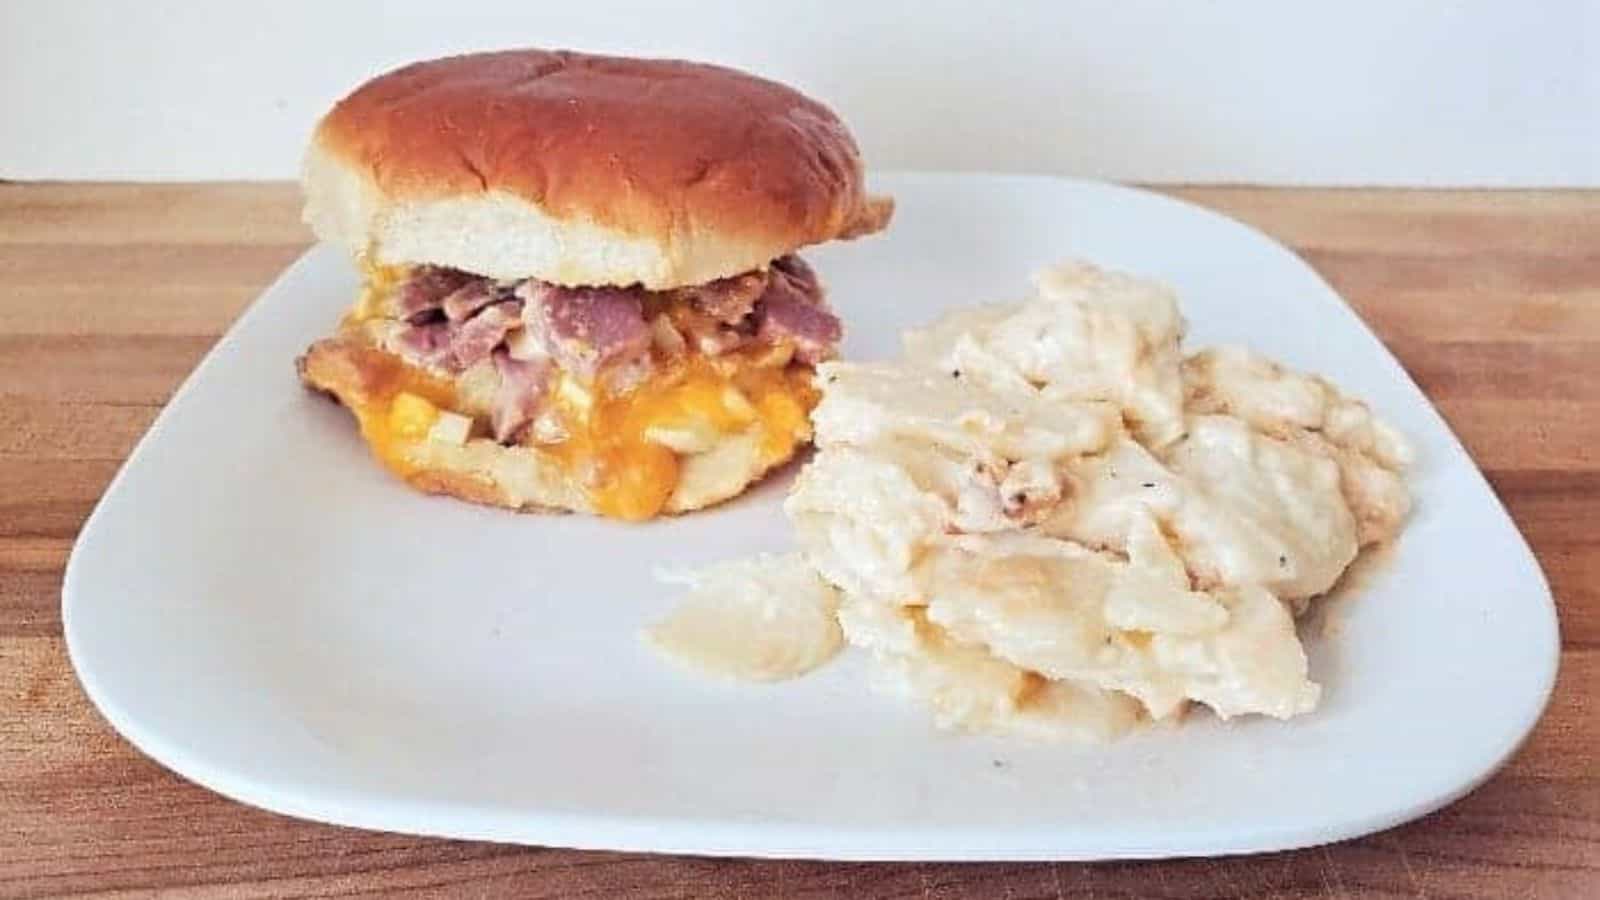 Image shows a white plate with a hot ham salad sandwich and scalloped potatoes.